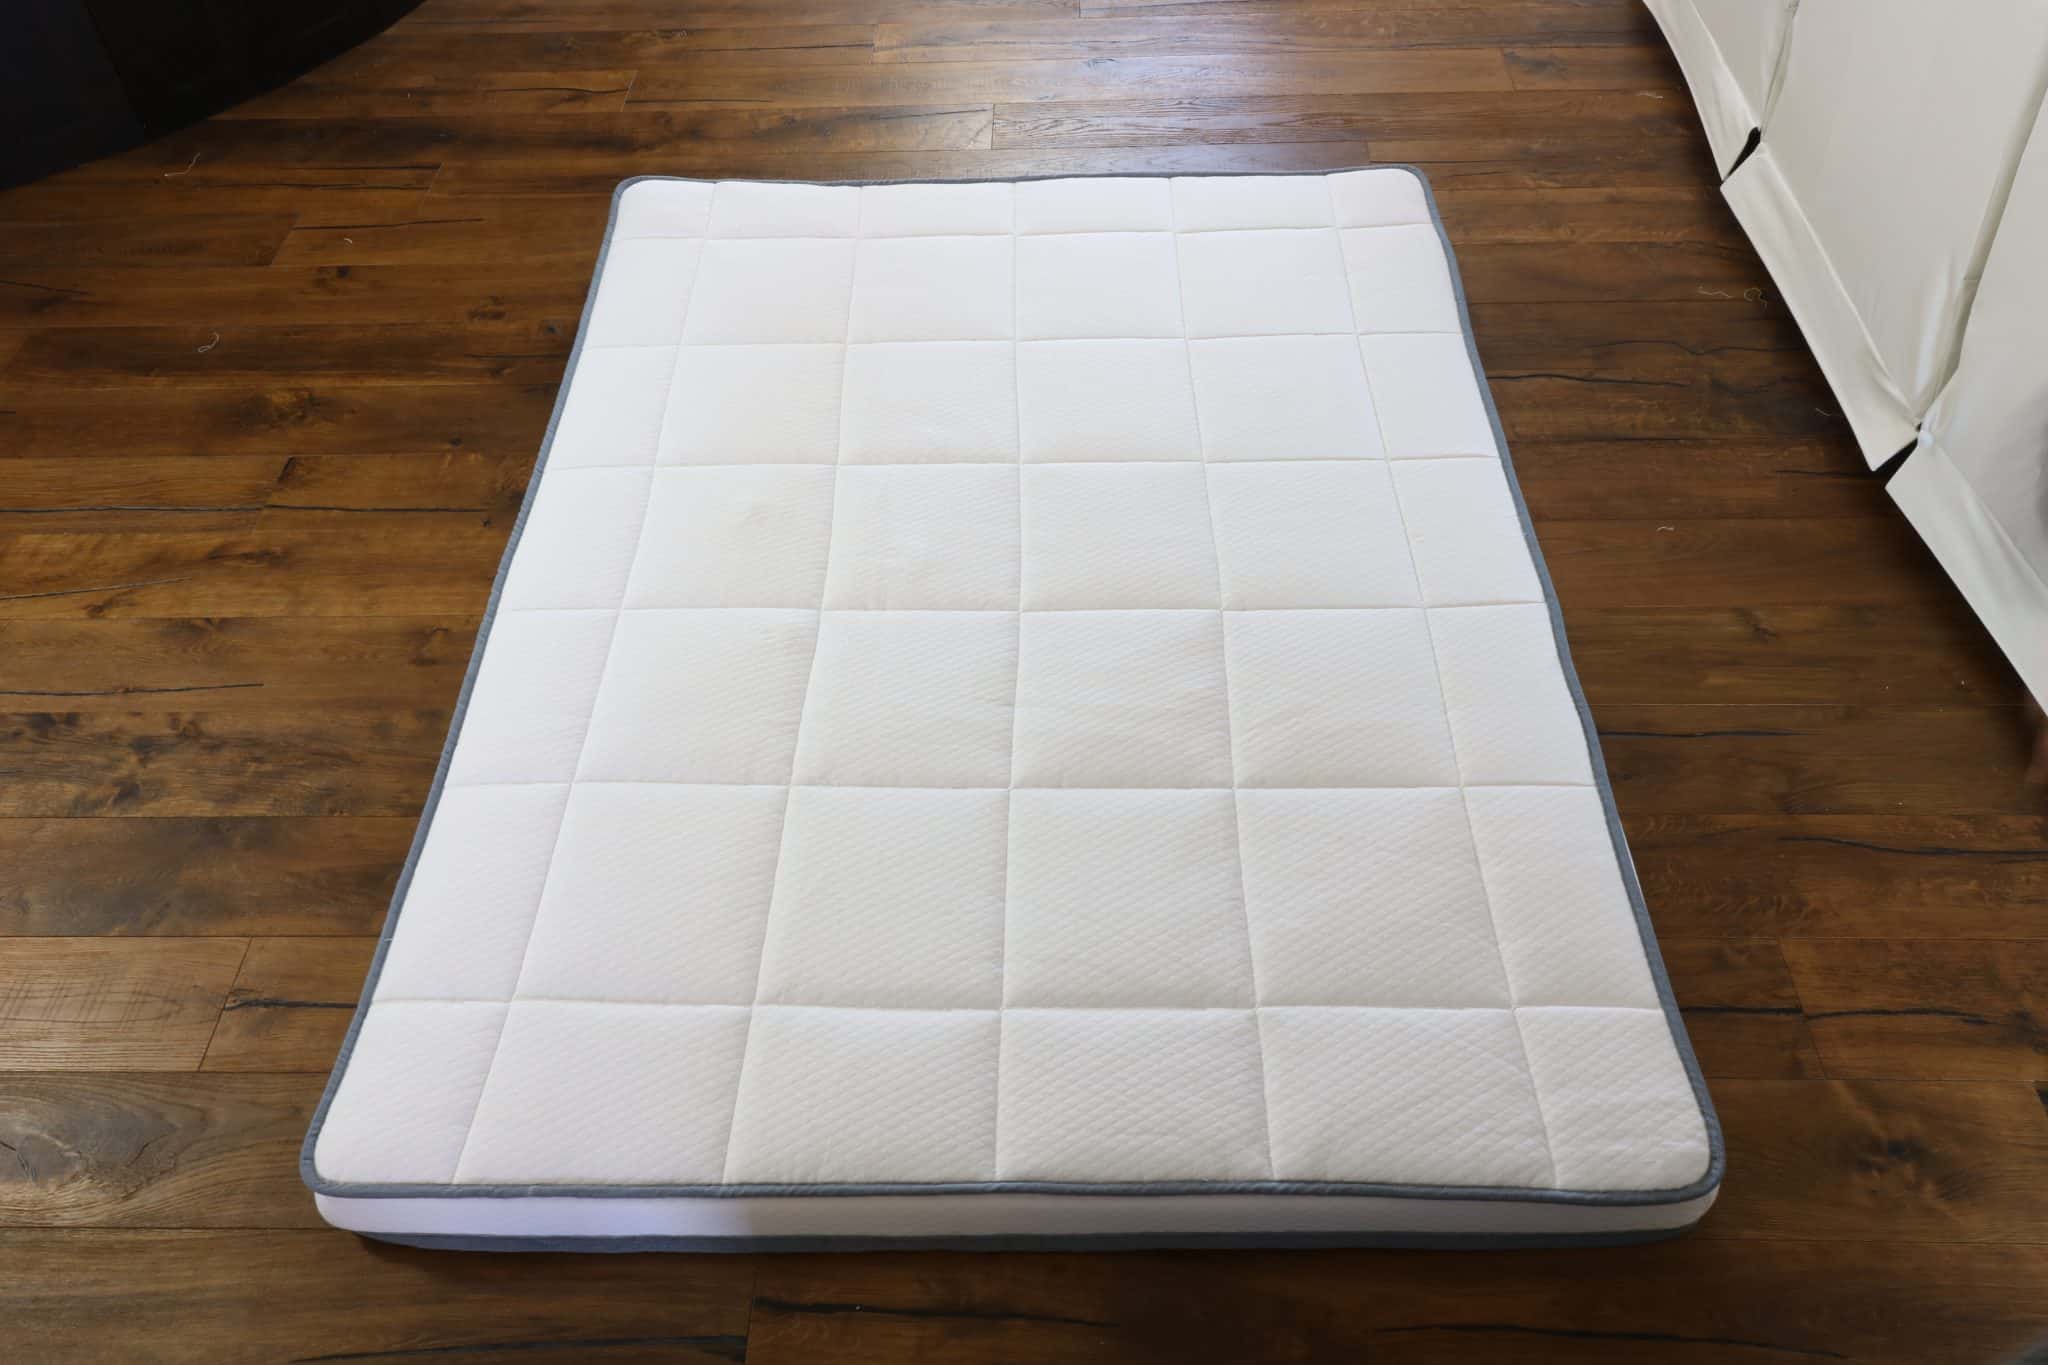 A Naturally Nestled mattress topper with a white cover resting on a dark hardwood floor